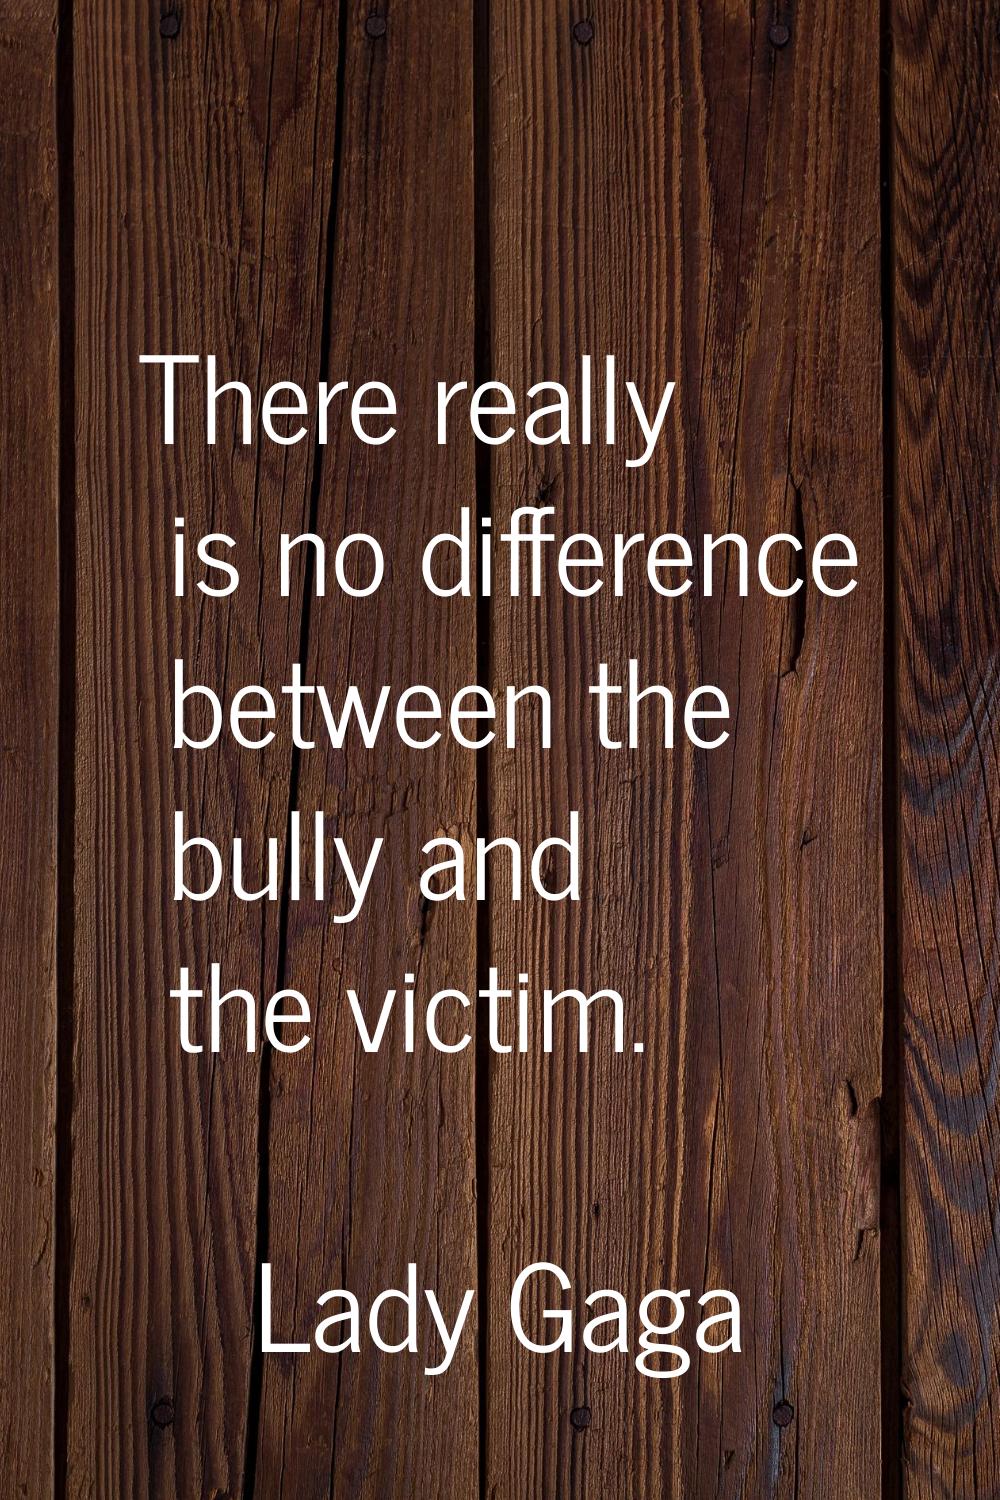 There really is no difference between the bully and the victim.